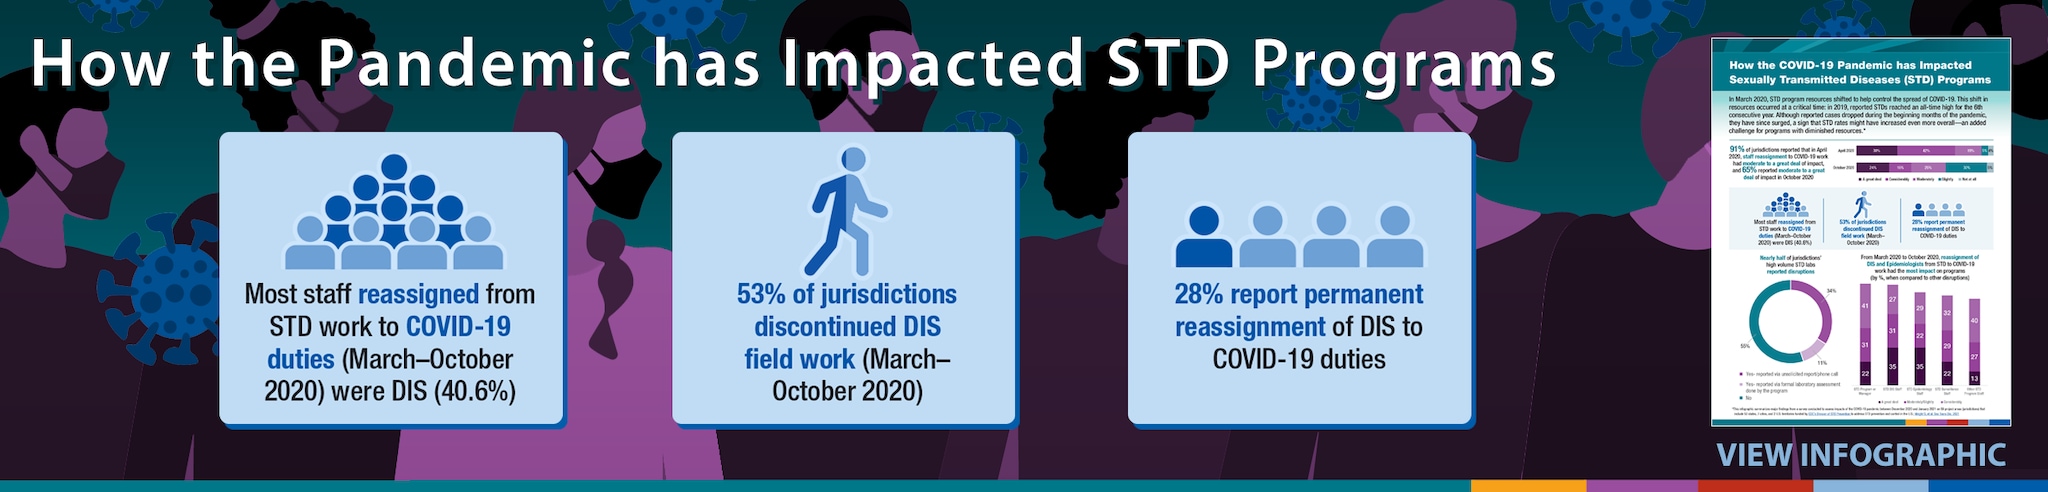 How the Pandemic has Affected STD Programs